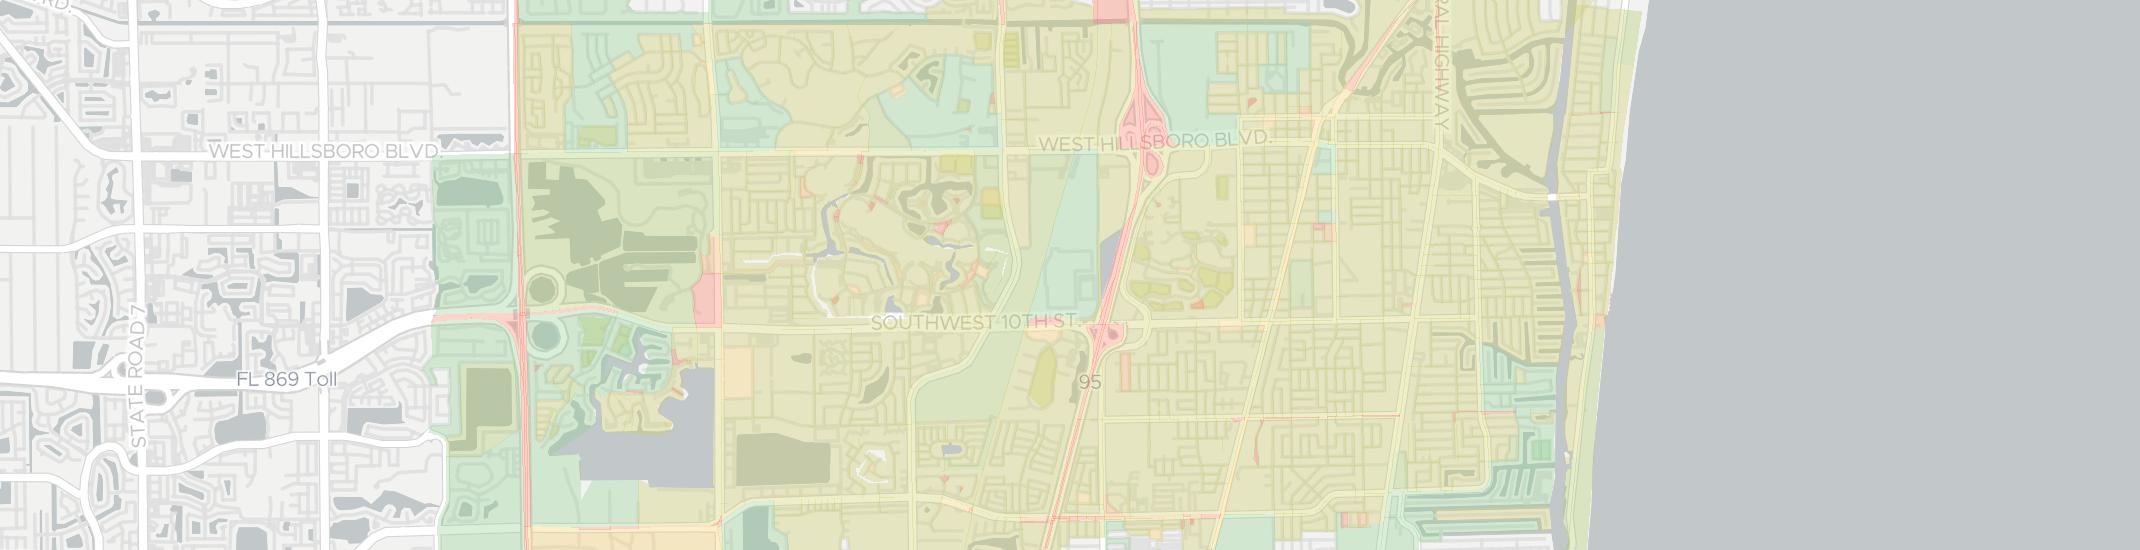 Deerfield Beach Internet Competition Map. Click for interactive map